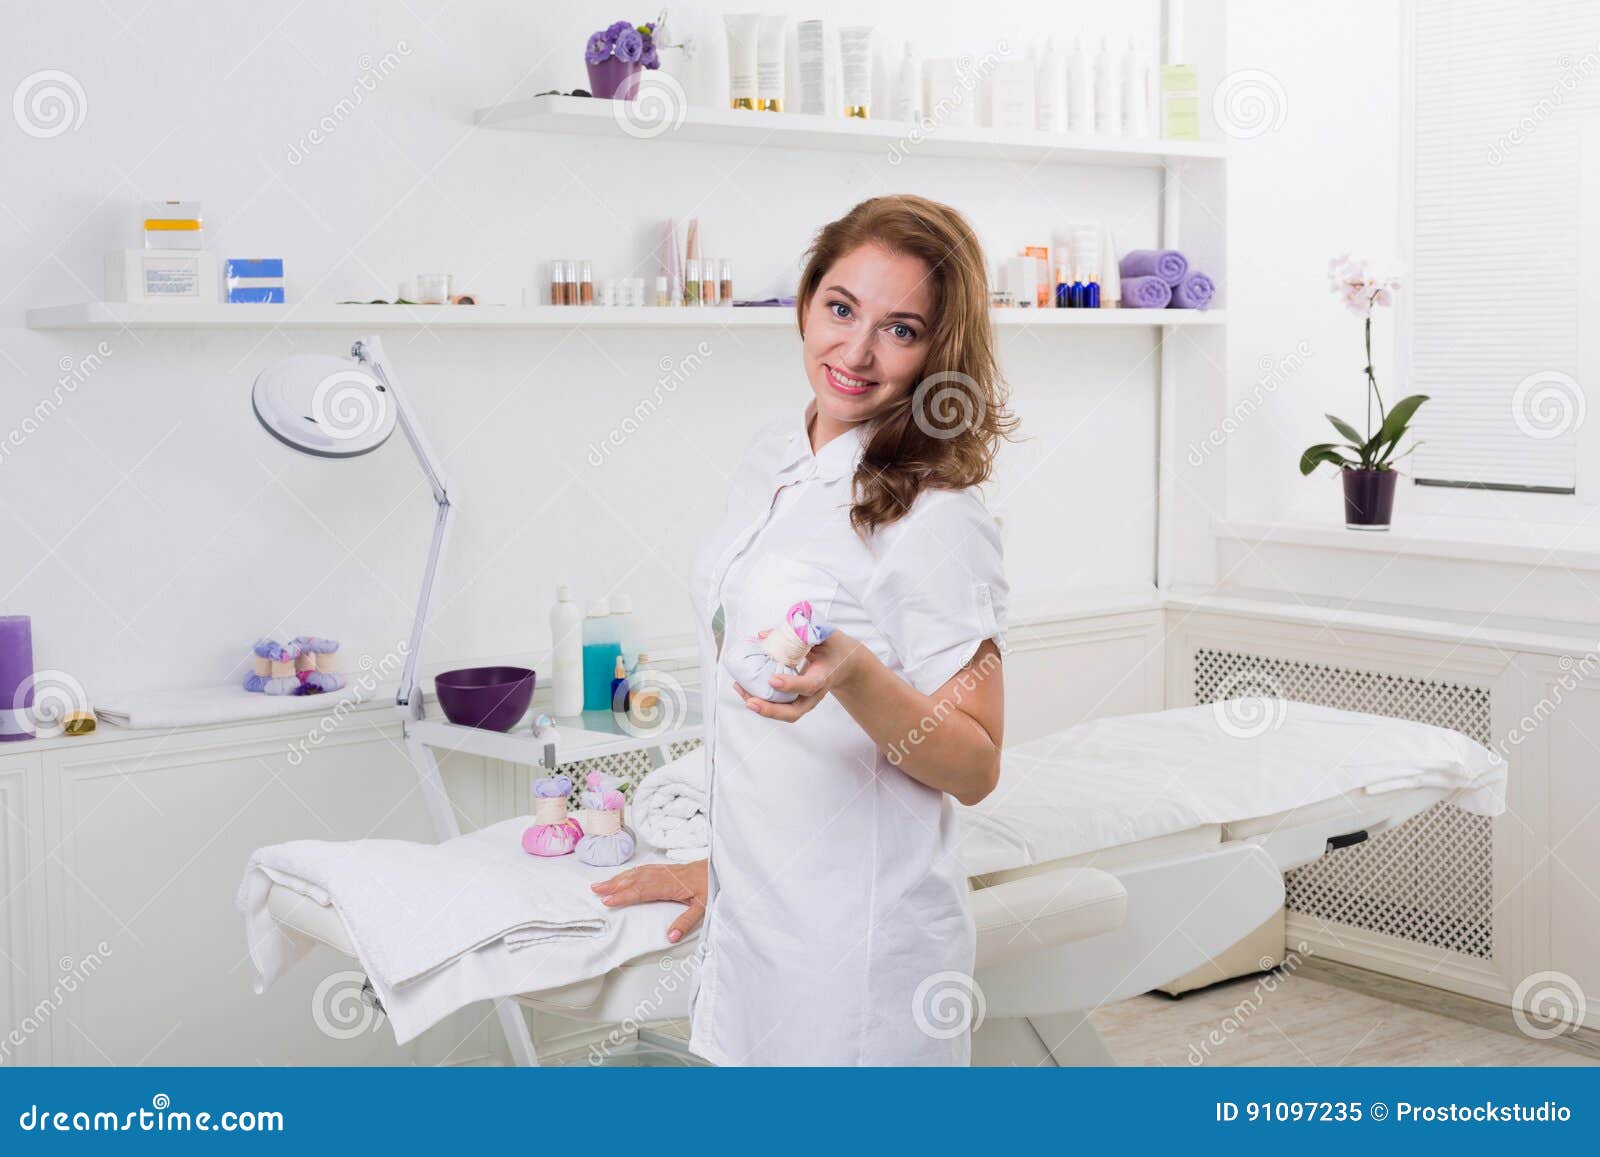 Woman Beautician Doctor At Work In Spa Center Stock Image Image Of